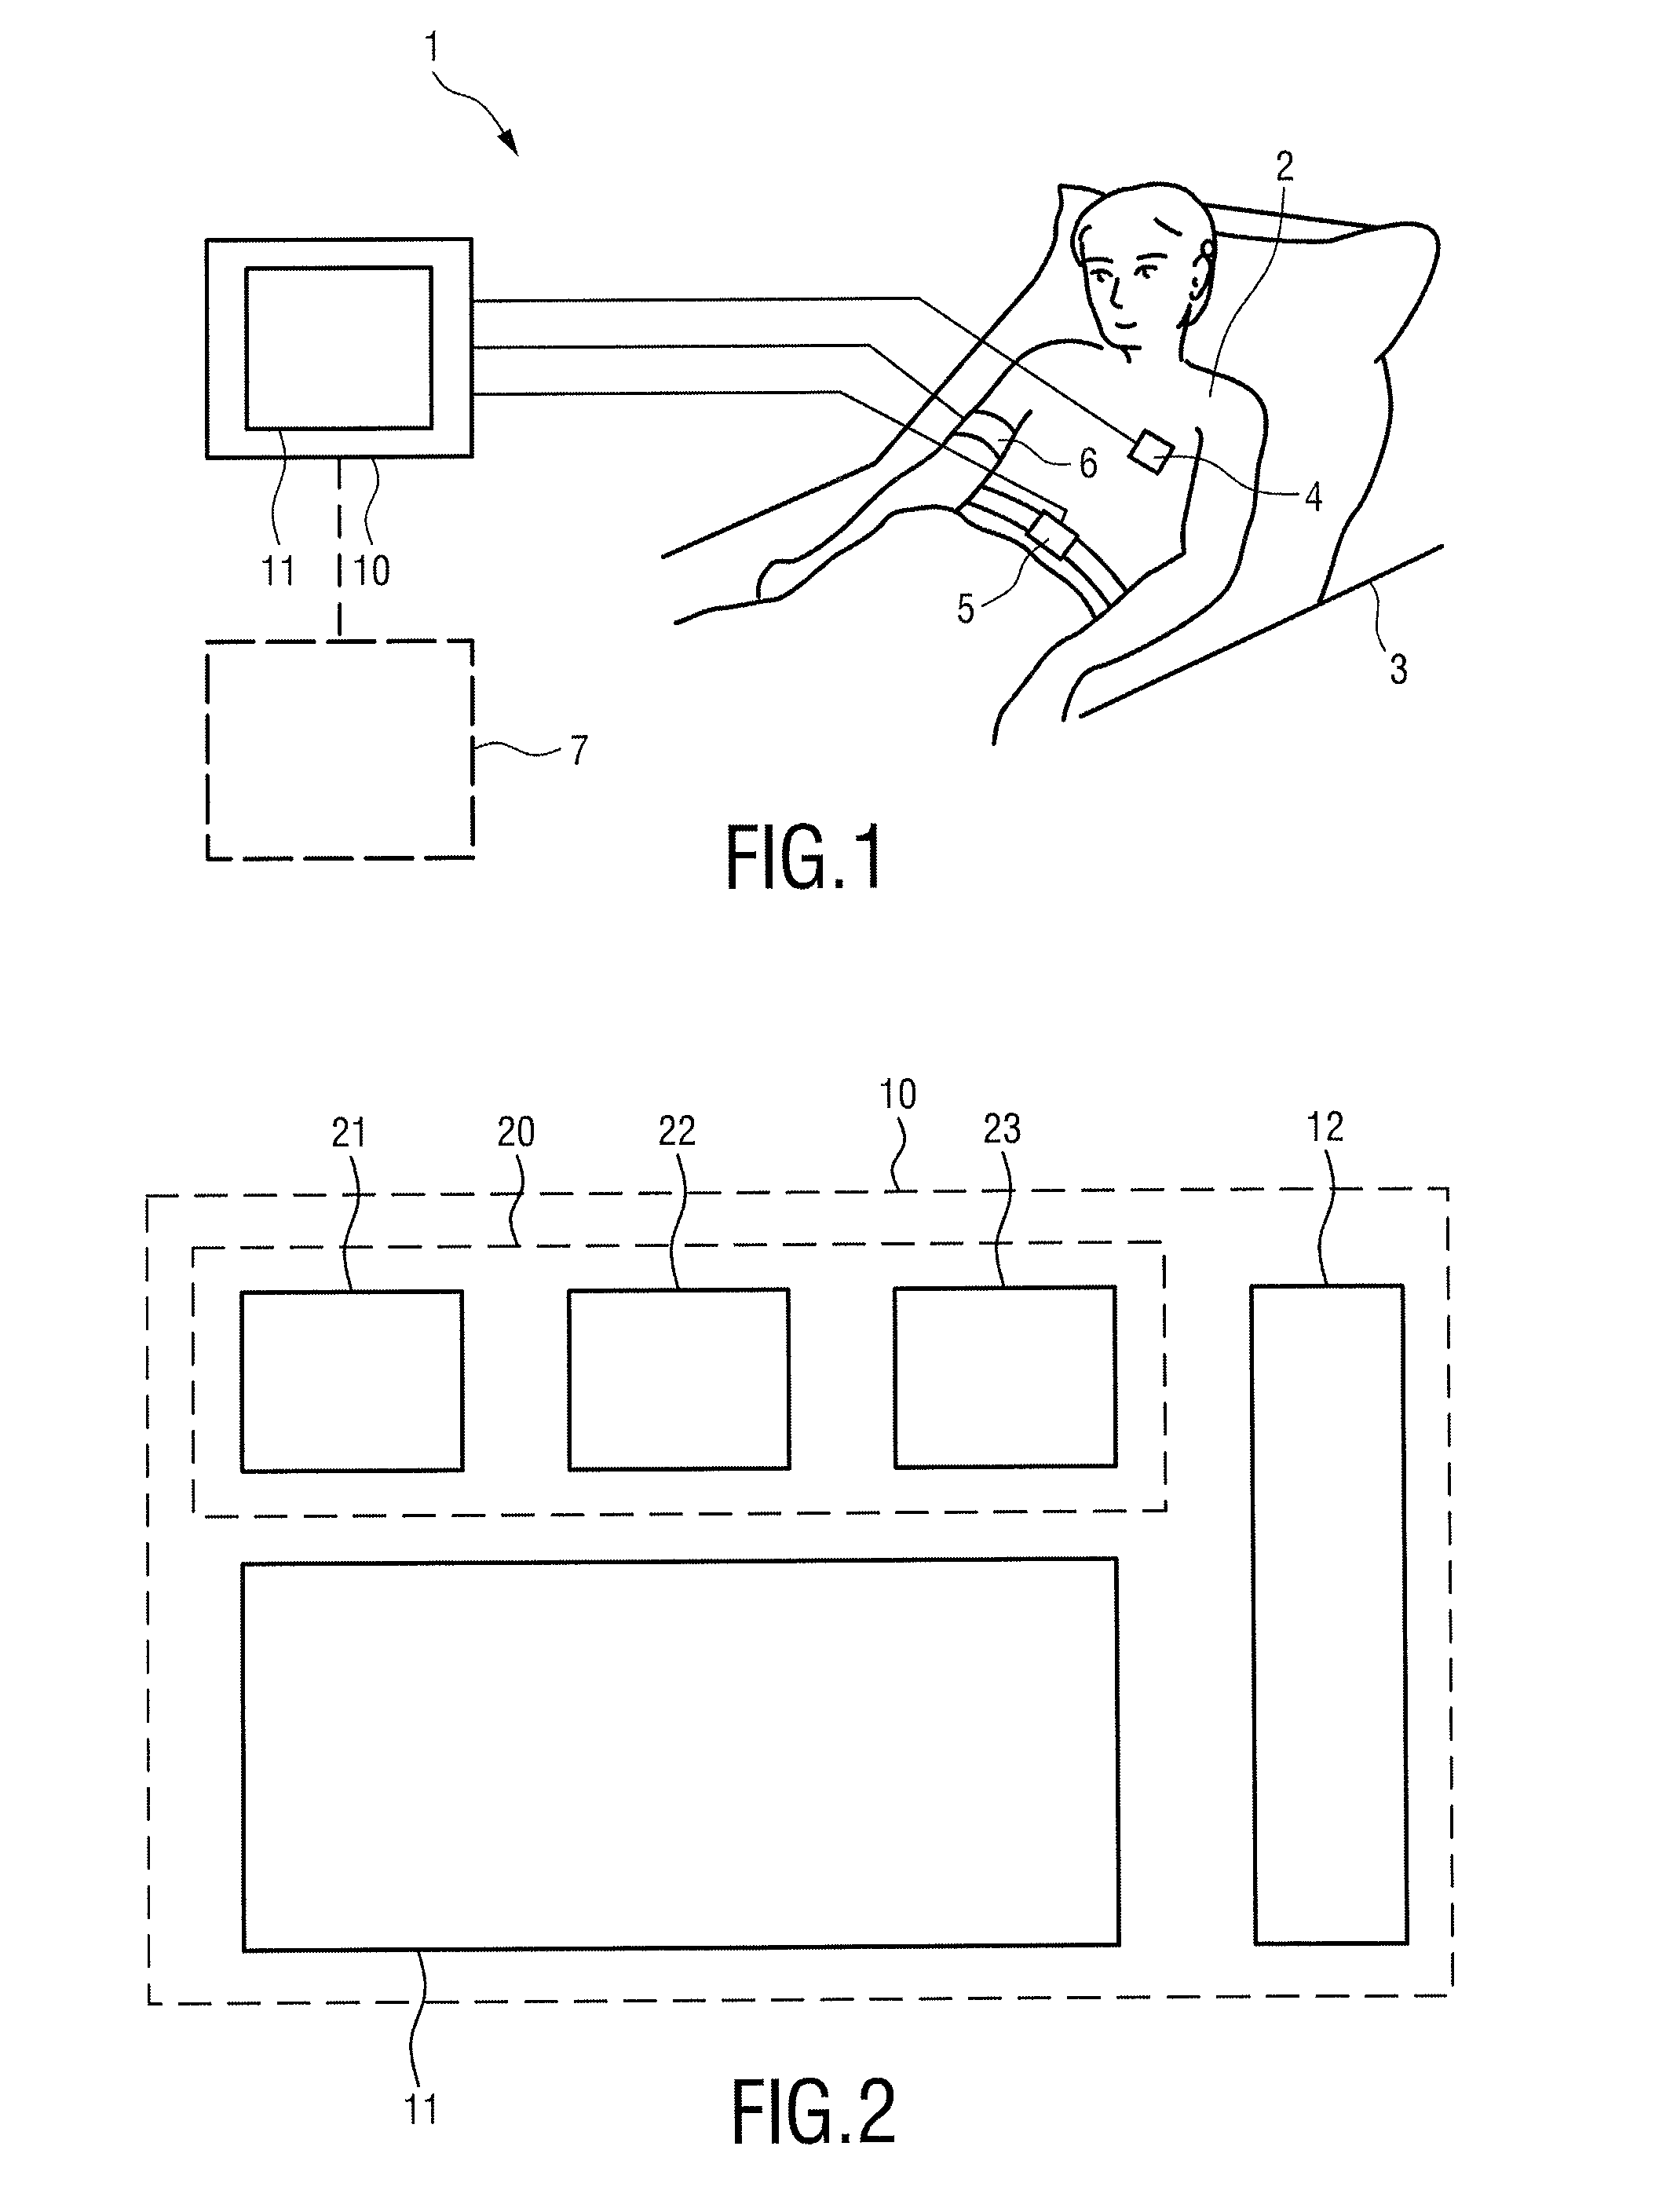 Device, system and method for visualization of patient-related data